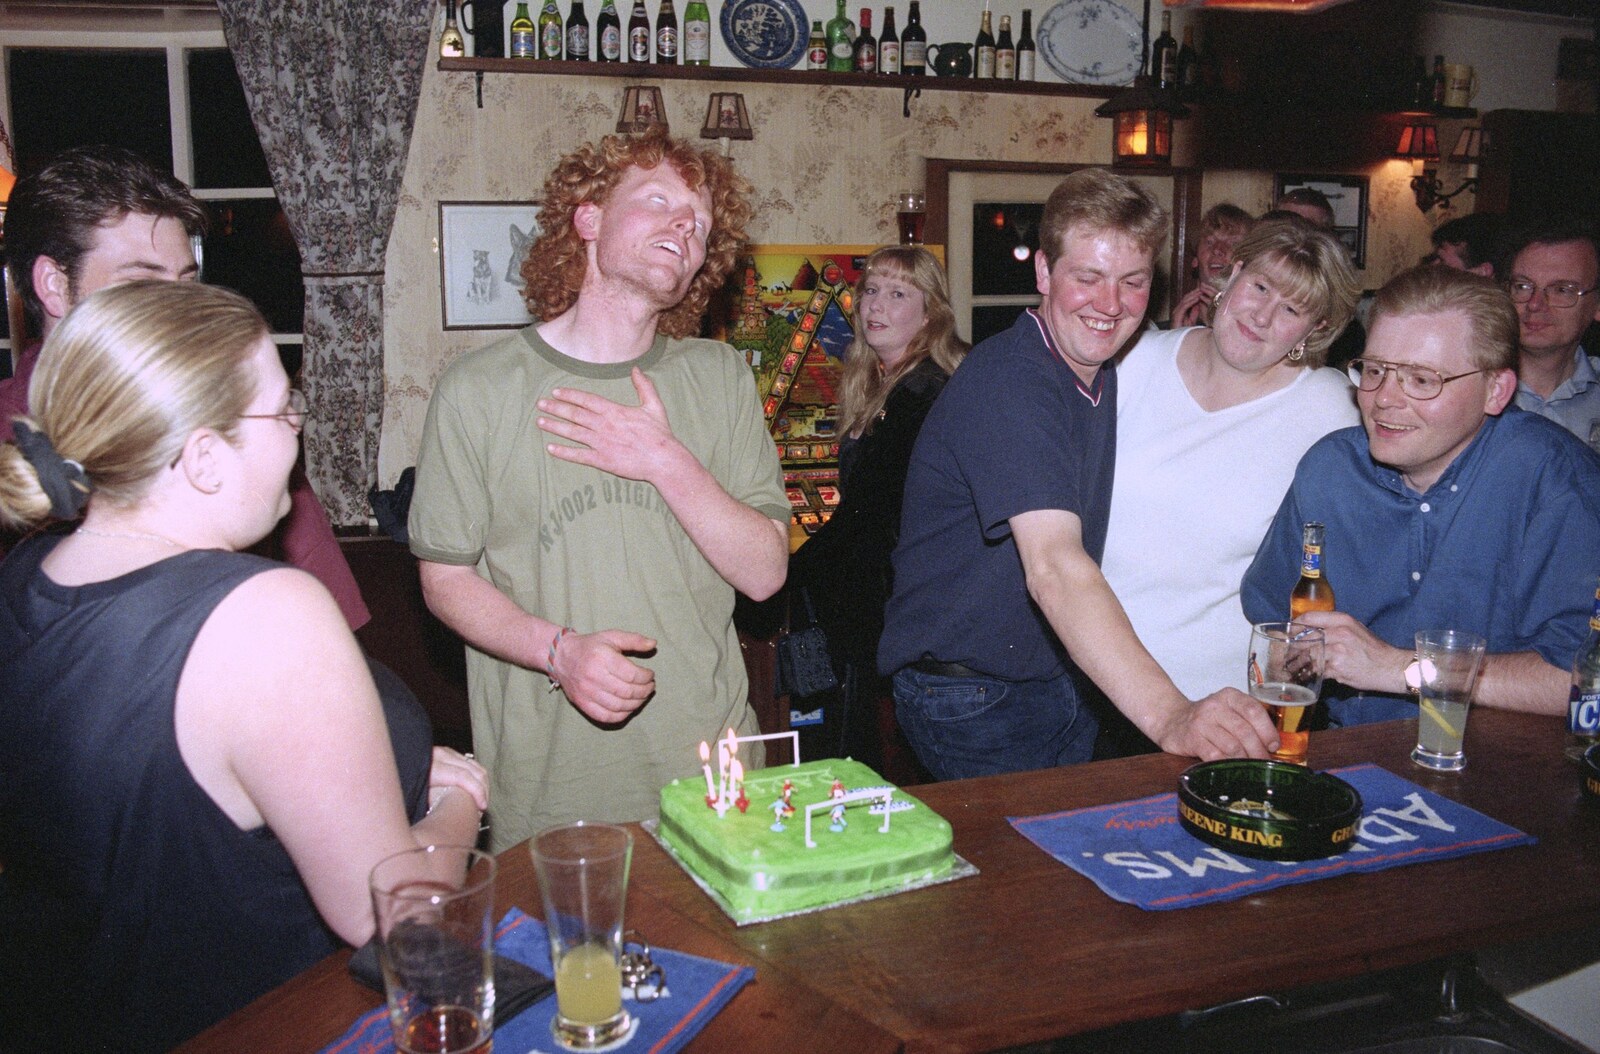 Wavy is overwhelmed from Wavy's Thirtieth Birthday, The Swan Inn, Brome, Suffolk - 24th May 2000